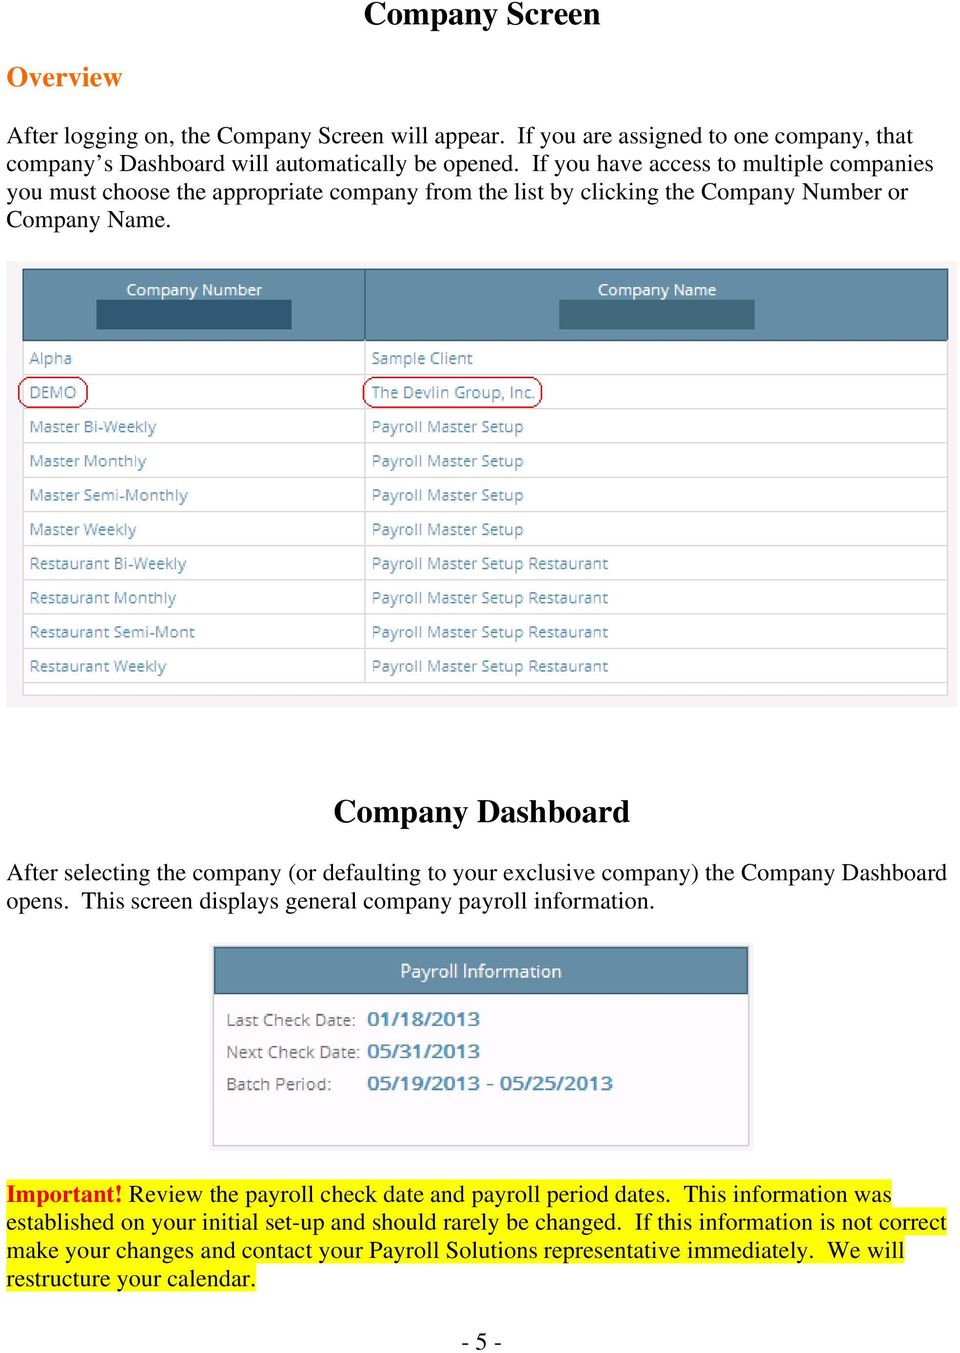 Company Dashboard After selecting the company (or defaulting to your exclusive company) the Company Dashboard opens. This screen displays general company payroll information. Important!